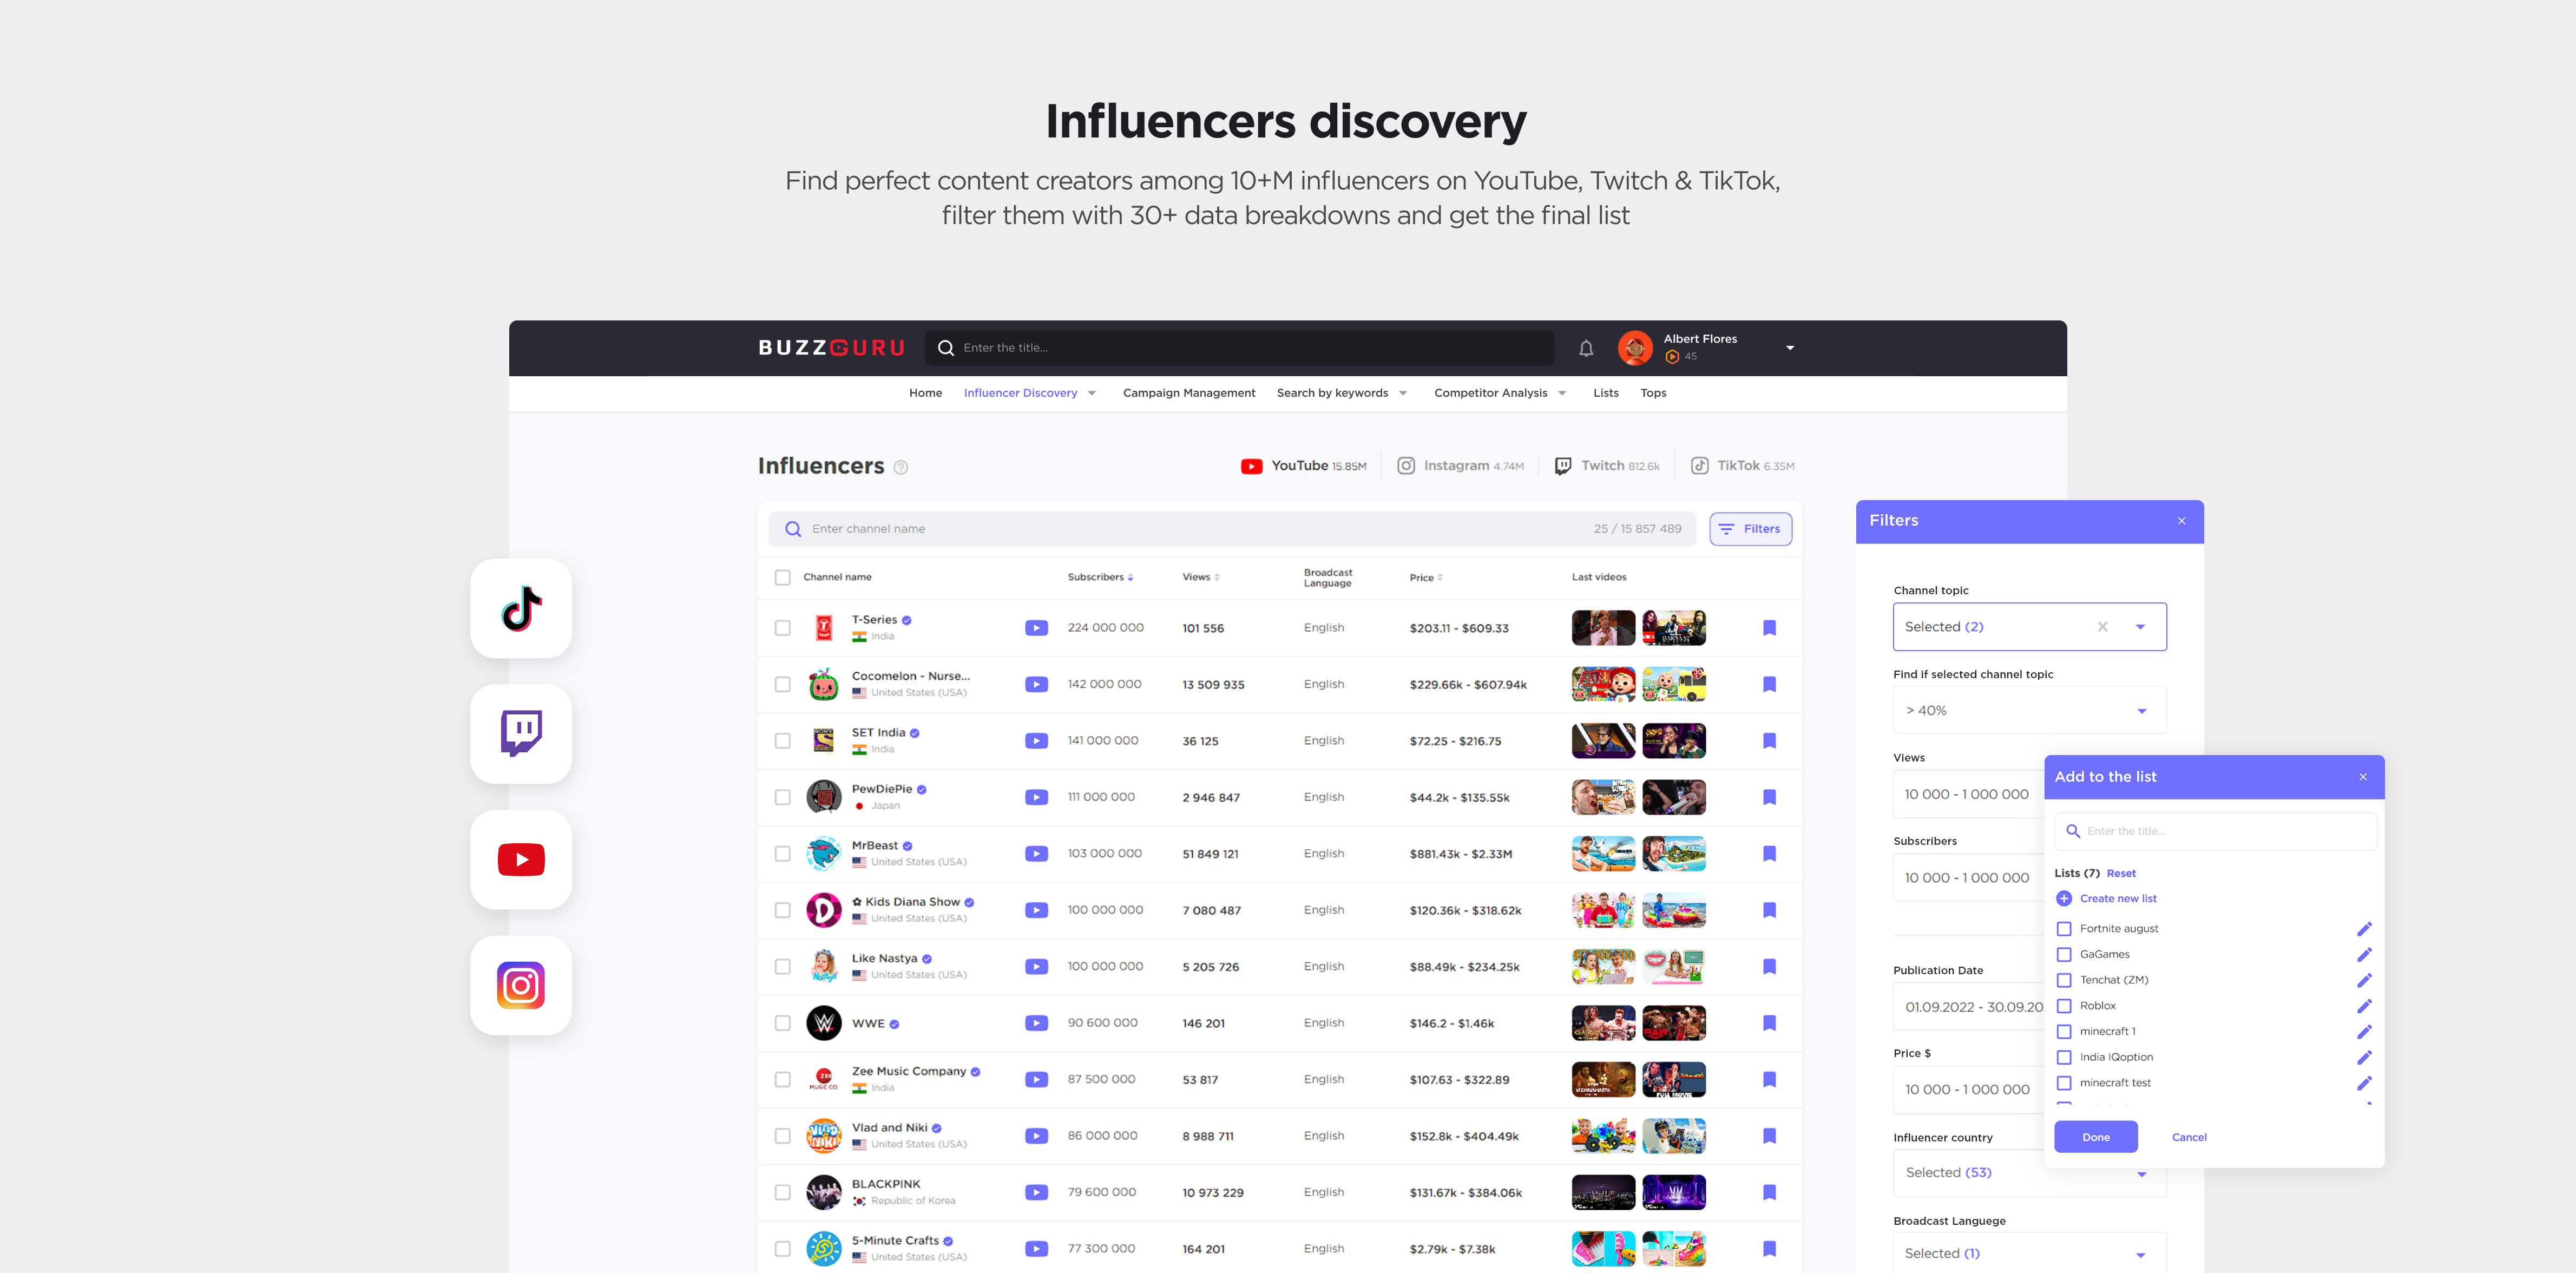 Influencers Discovery